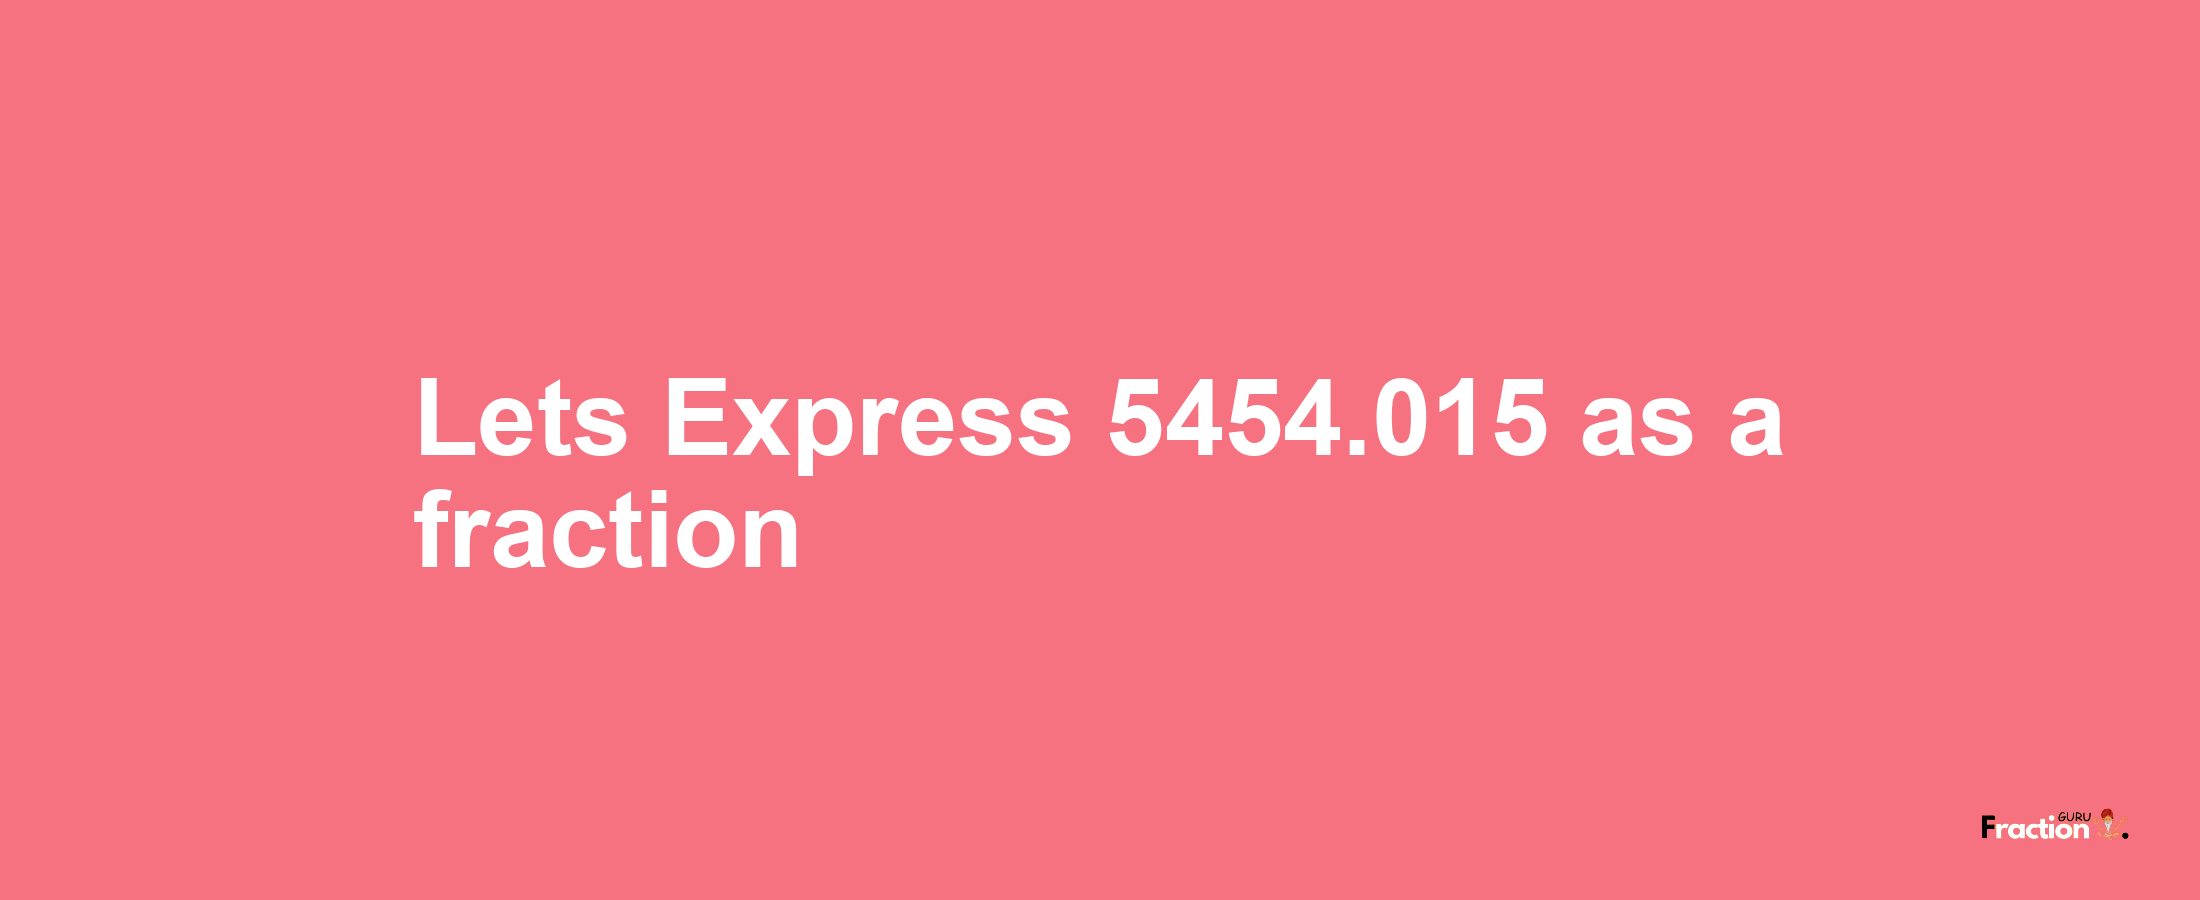 Lets Express 5454.015 as afraction